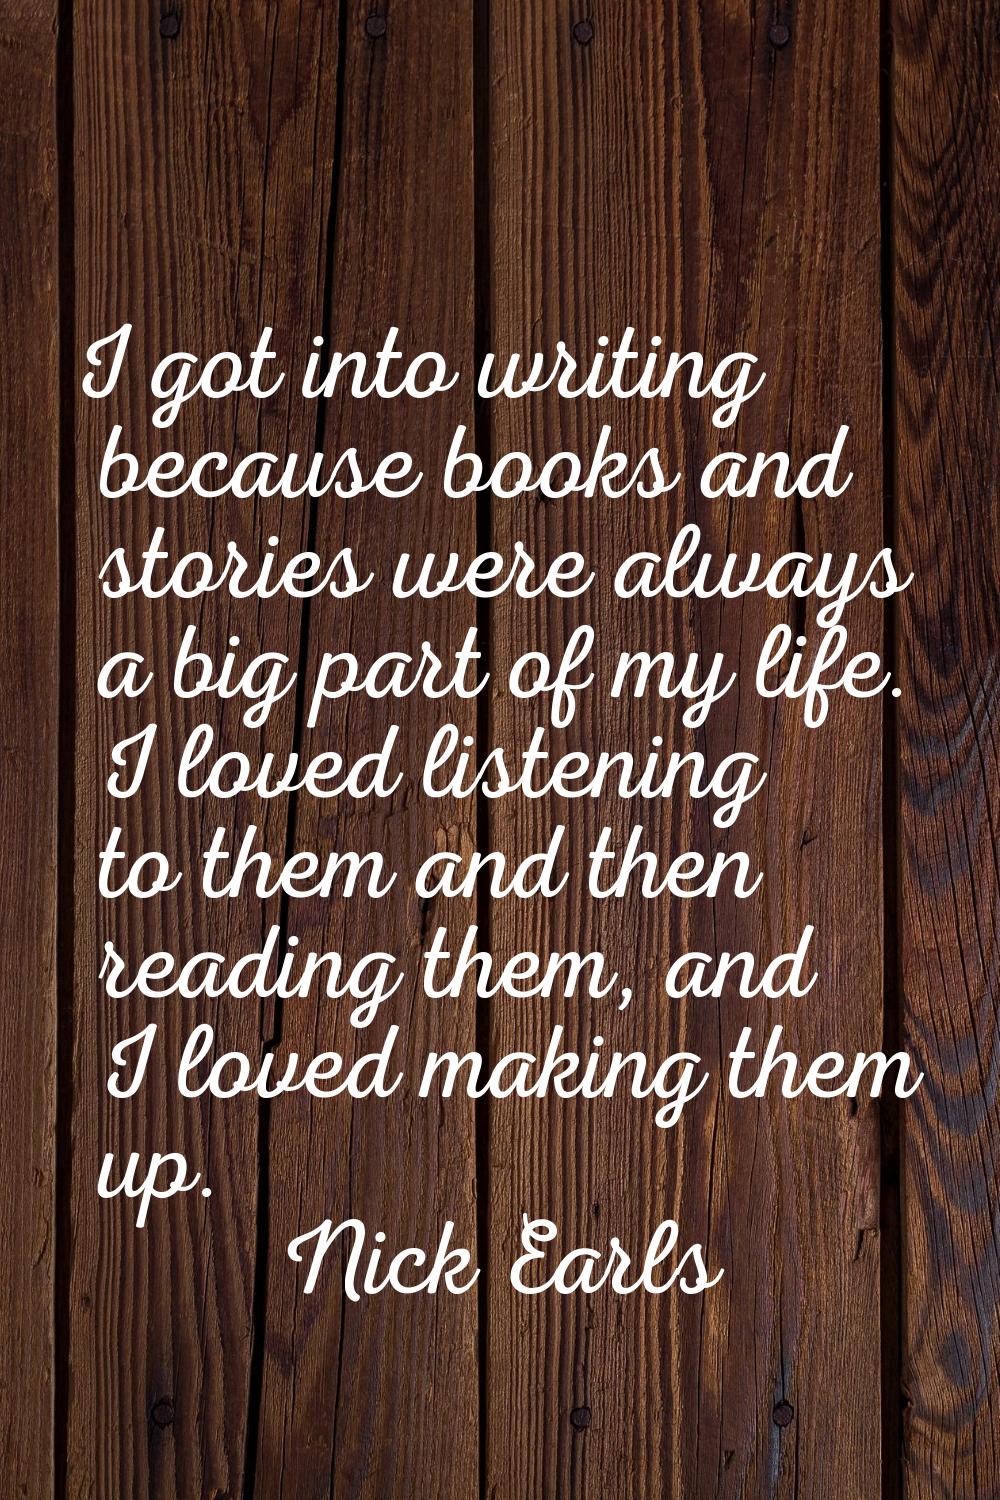 I got into writing because books and stories were always a big part of my life. I loved listening t